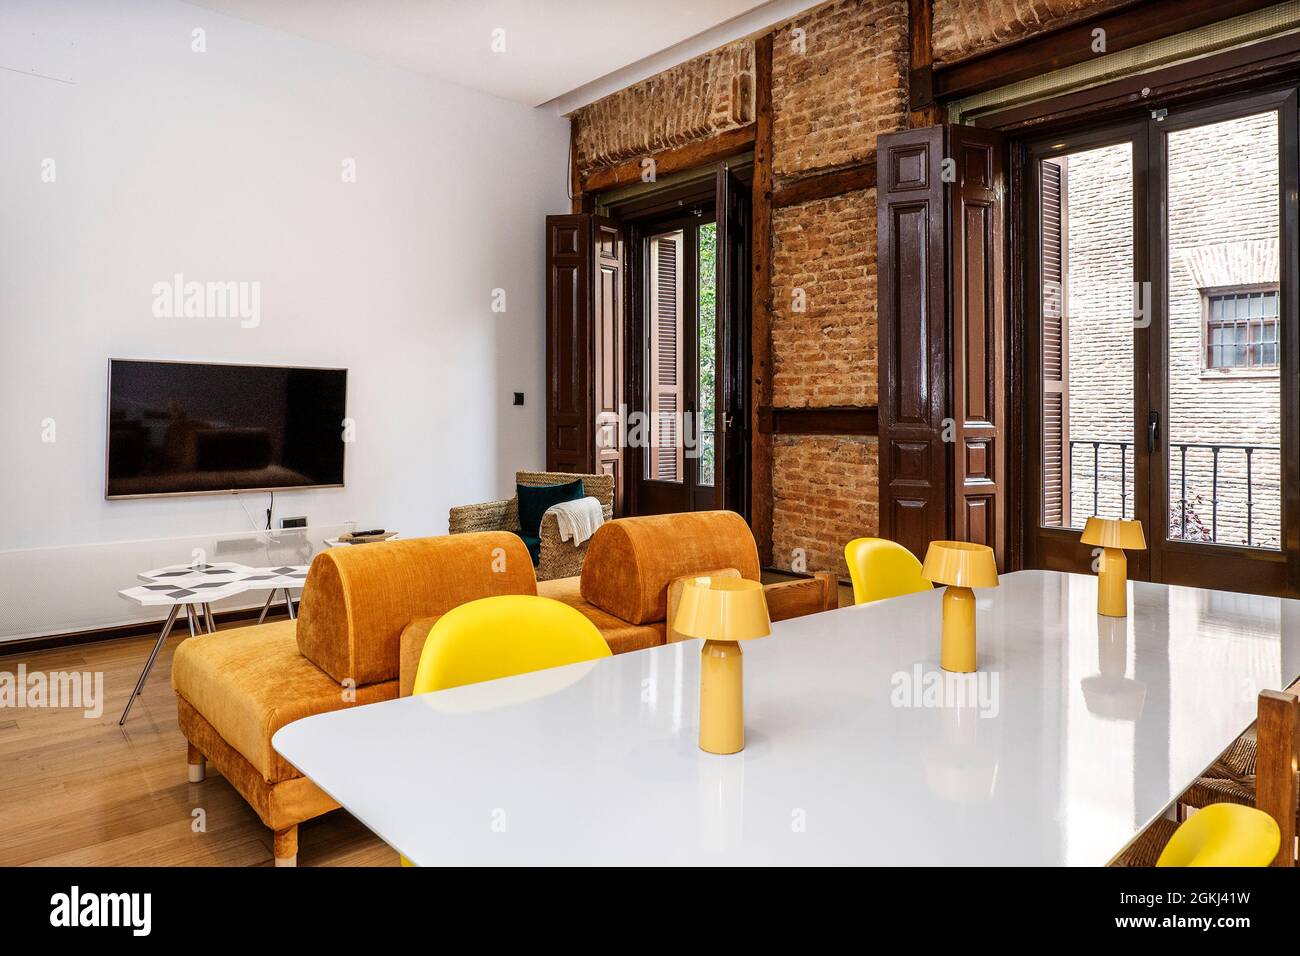 Large dining table in the foreground in a dining room with tv, large windows and exposed brick wall in an old Spanish building dedicated to vacation r Stock Photo